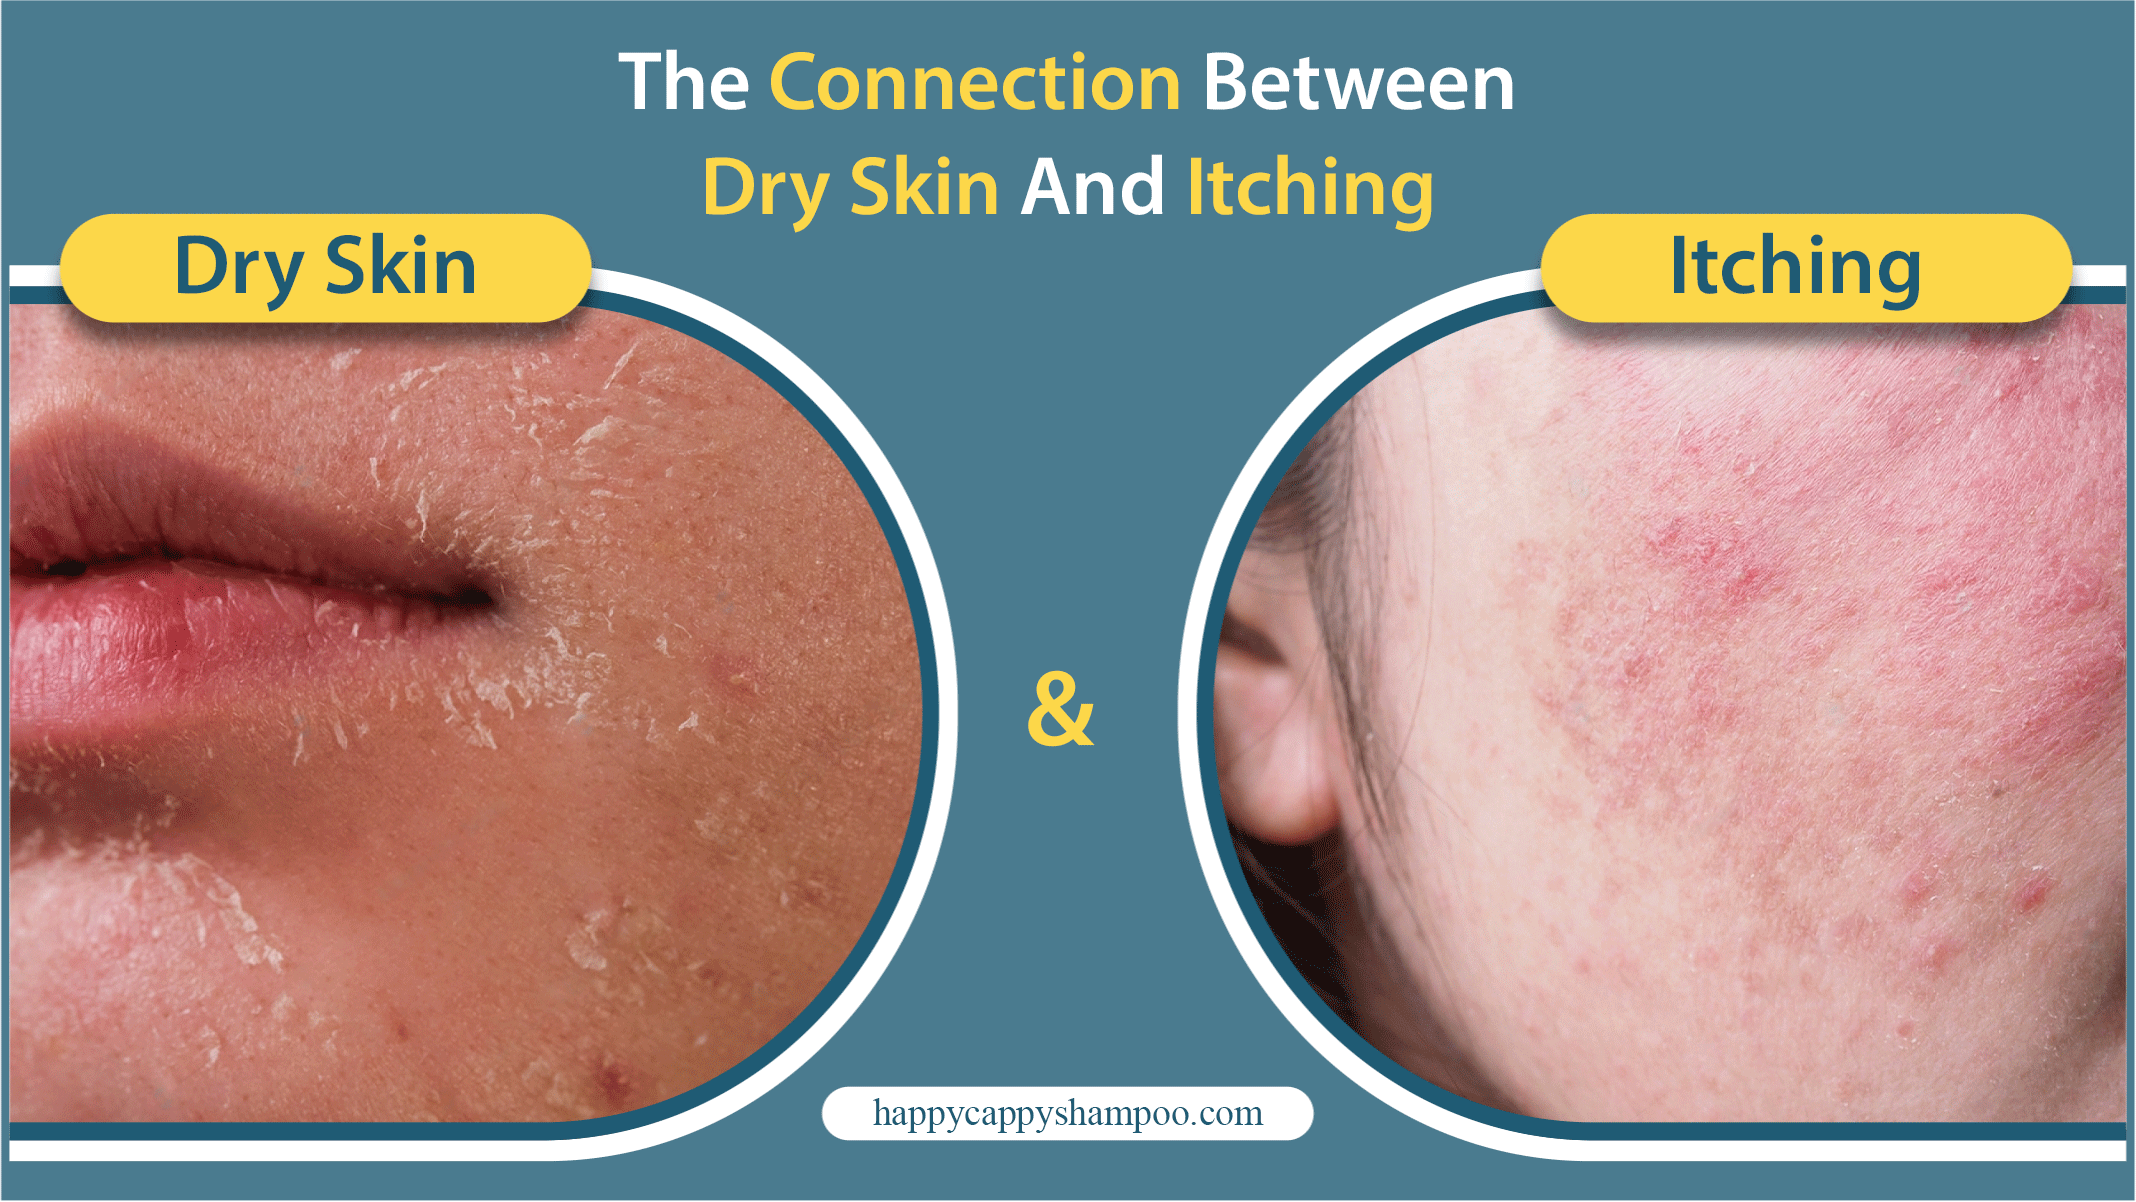 Dry Skin and Itching